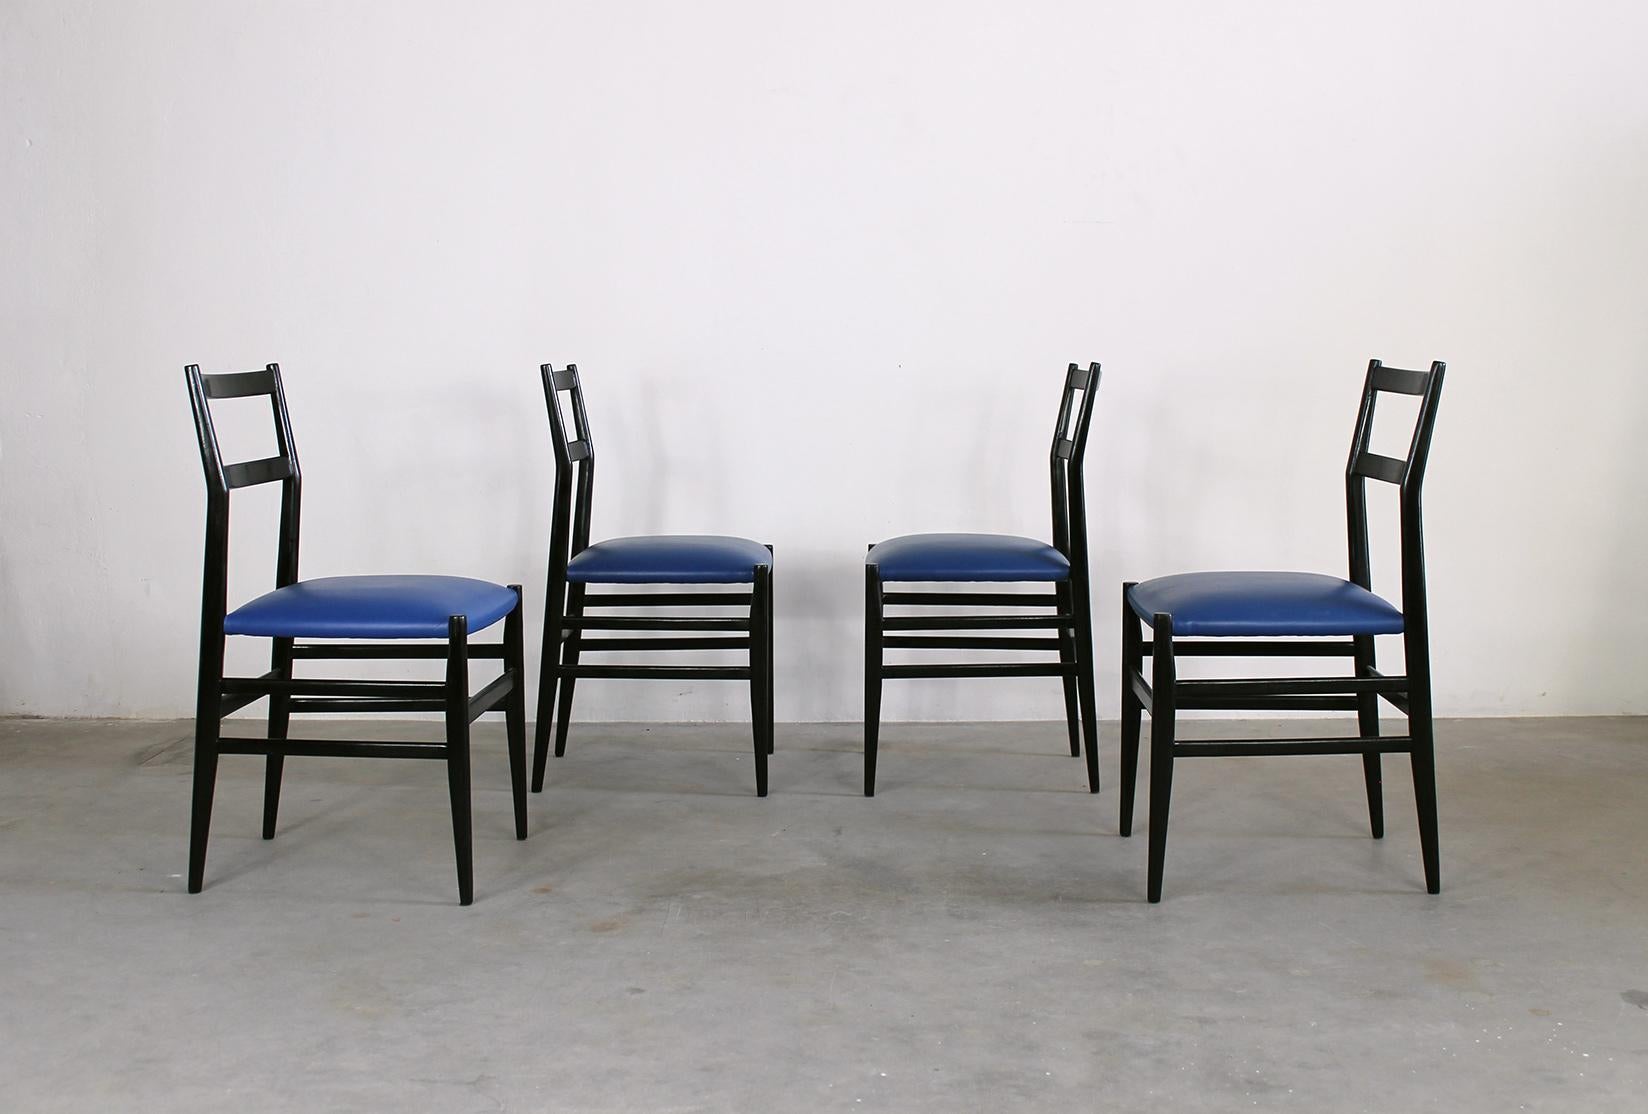 Gio Ponti Set of Four Leggera Dining Chairs by Cassina 1951 Italy In Good Condition For Sale In Montecatini Terme, IT